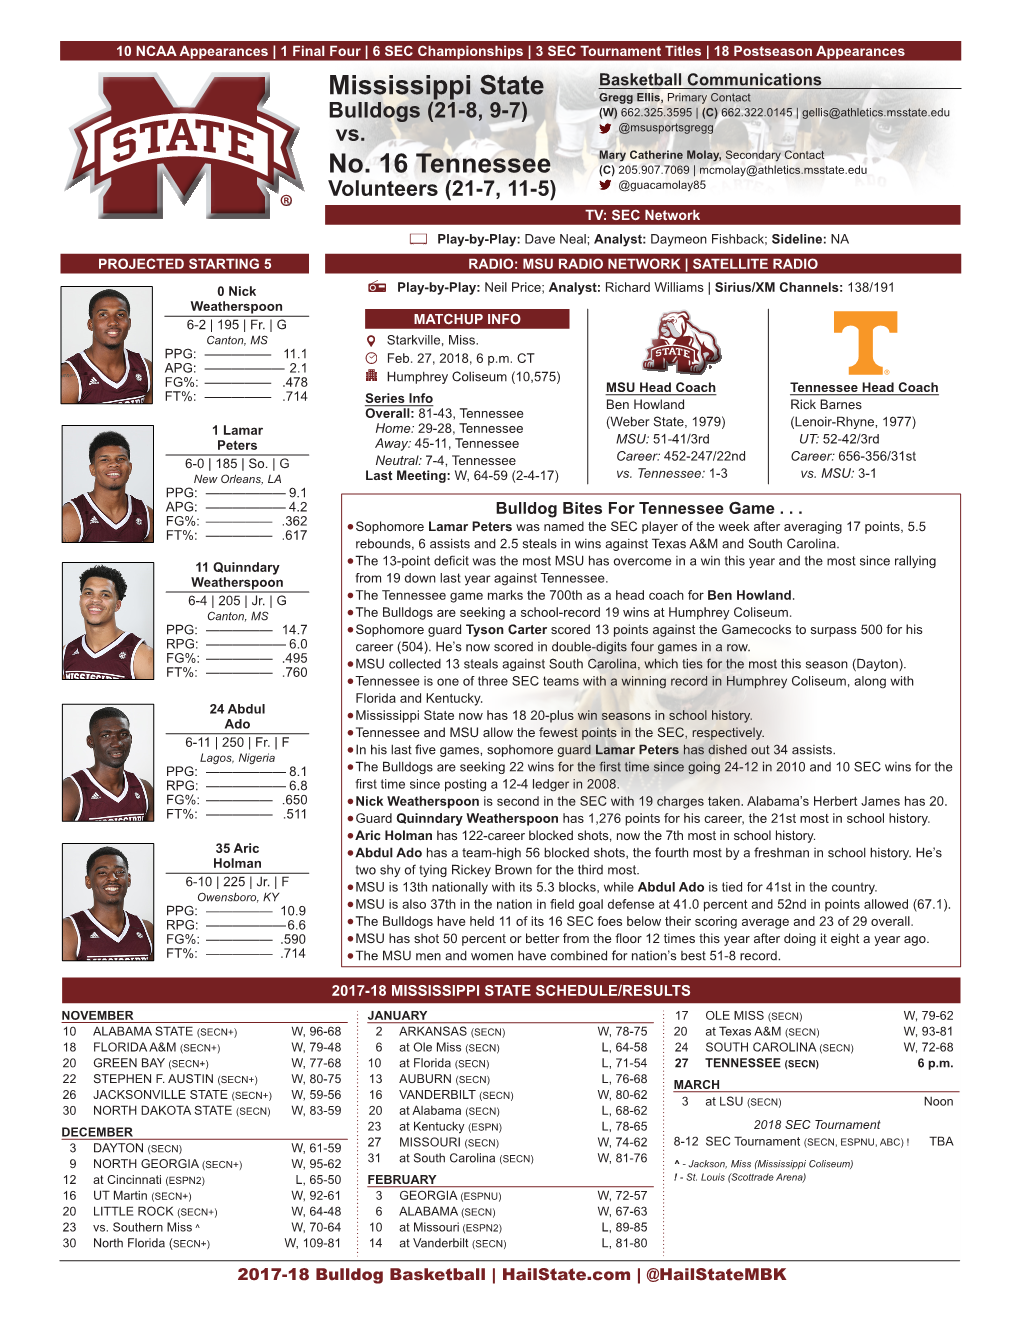 Mississippi State No. 16 Tennessee